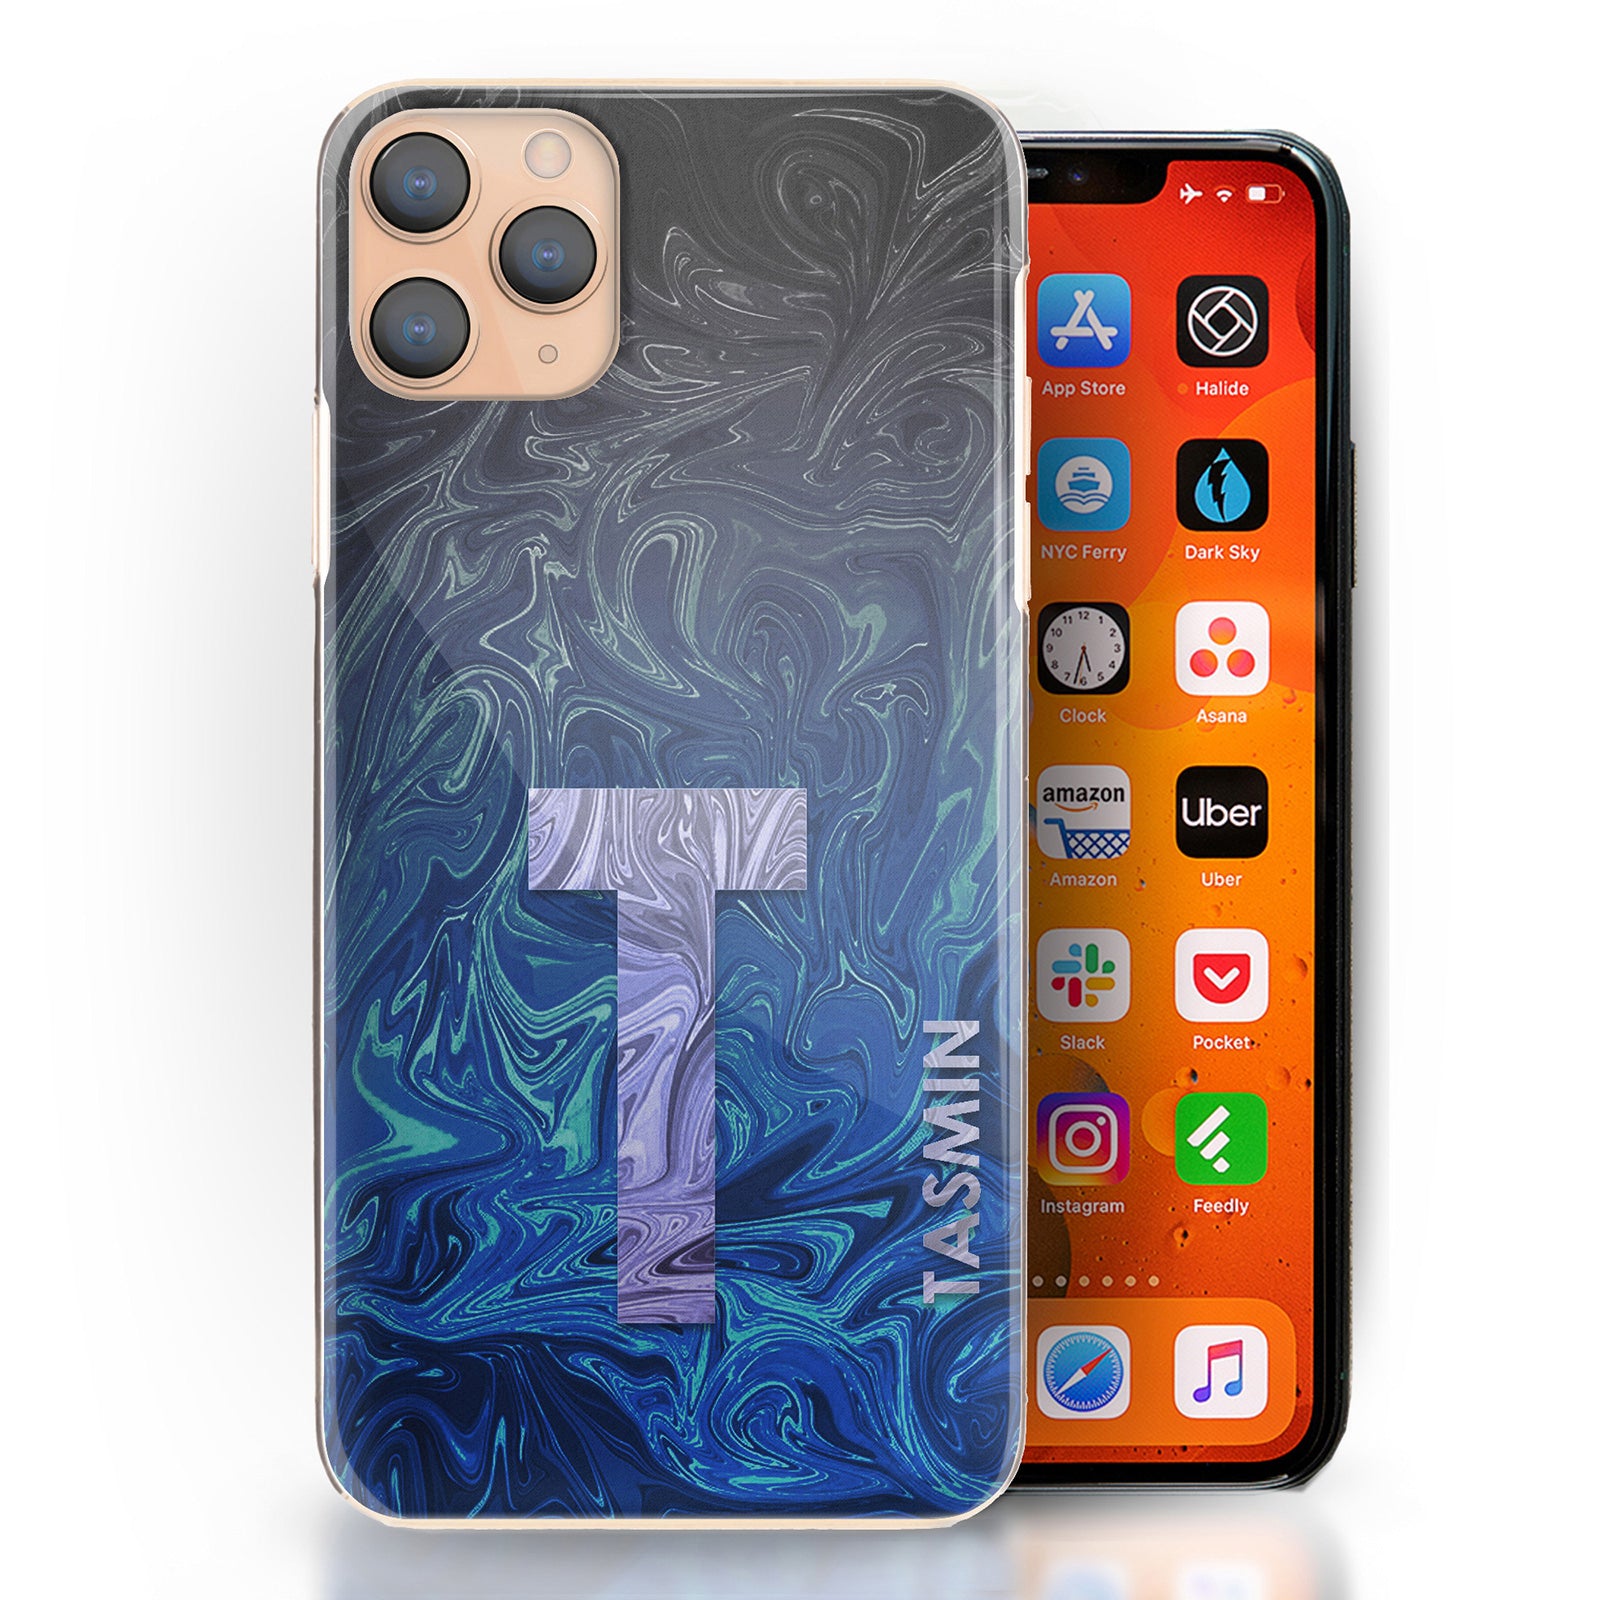 Personalised Xiaomi Phone Hard Case with Lilac Text and Initial on Blue Gradient Swirled Marble